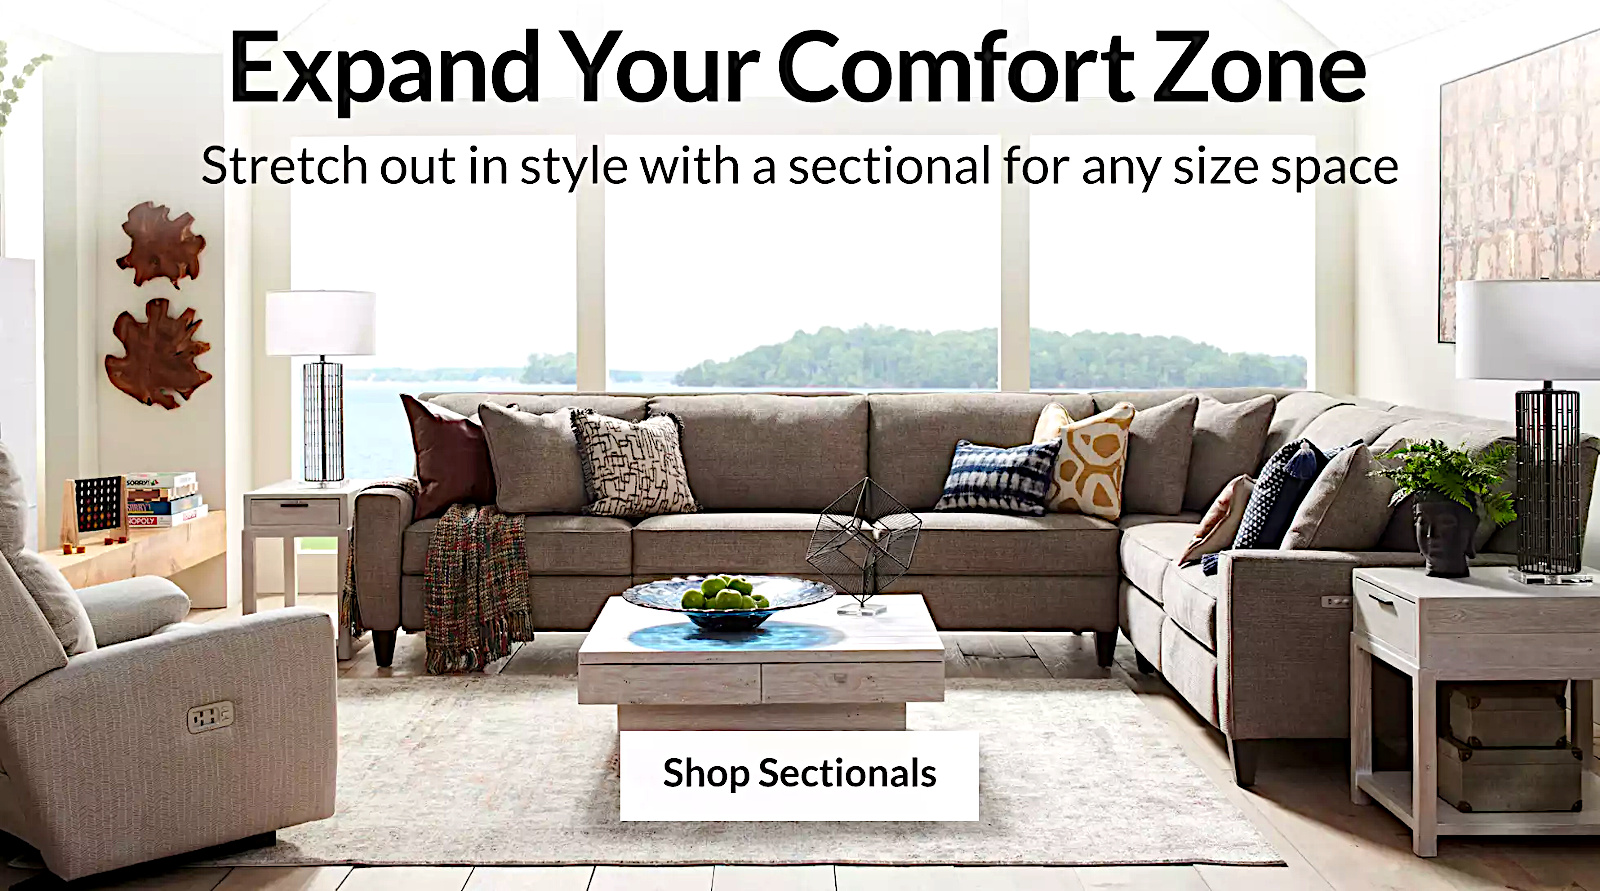 At A Bargain Price Expand your comfort zone